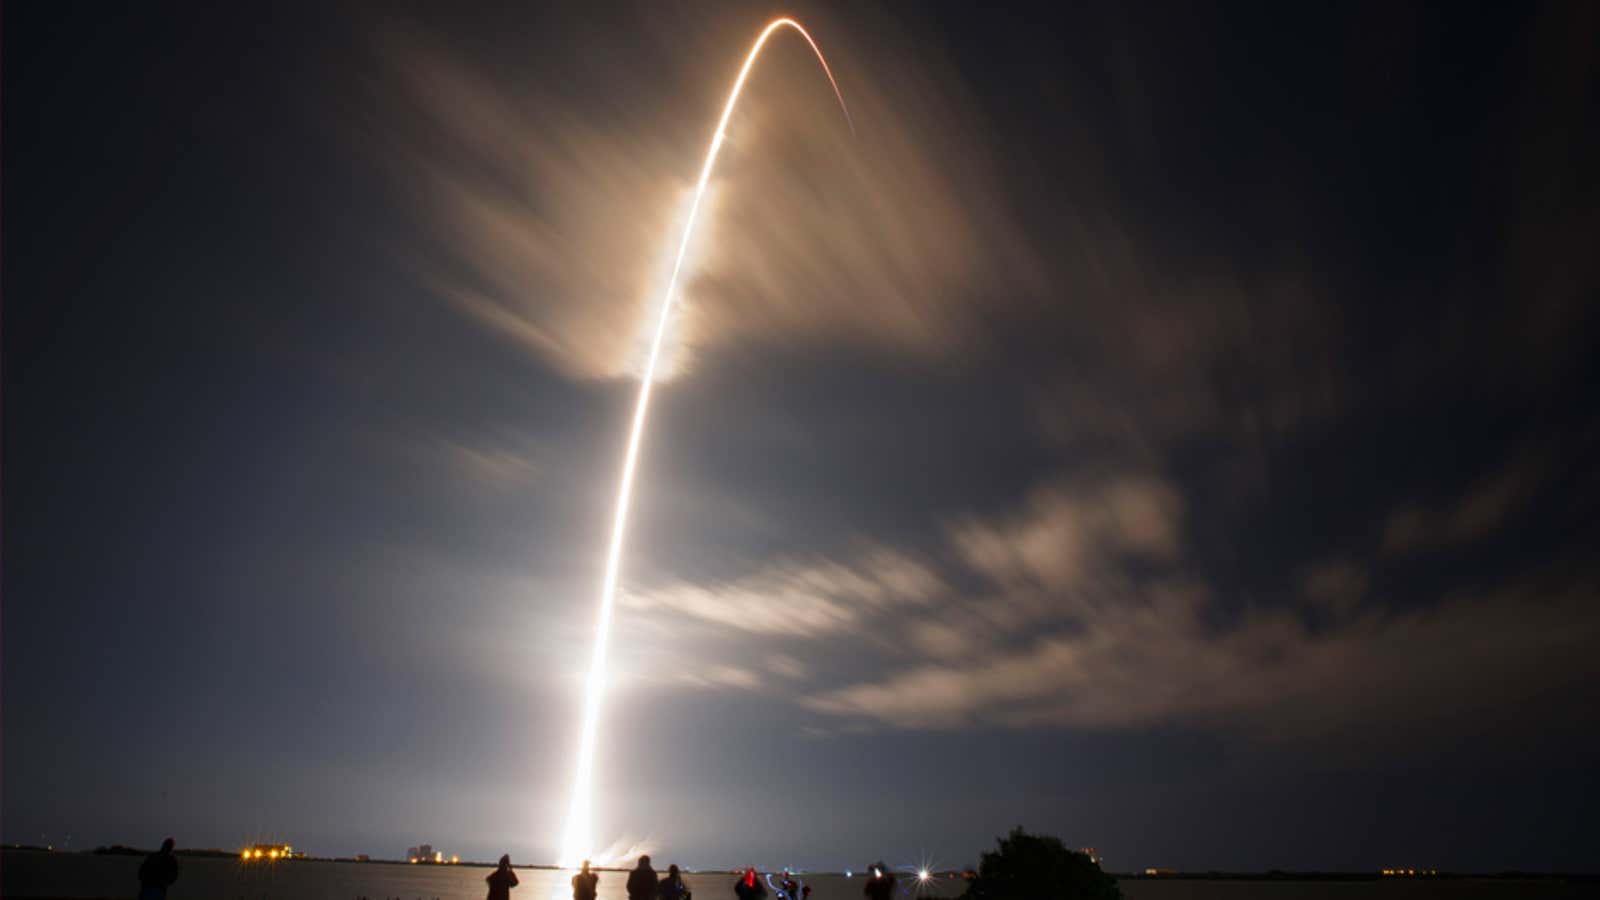 SpaceX’s Falcon 9 launch was unmanned, but not devoid of life.